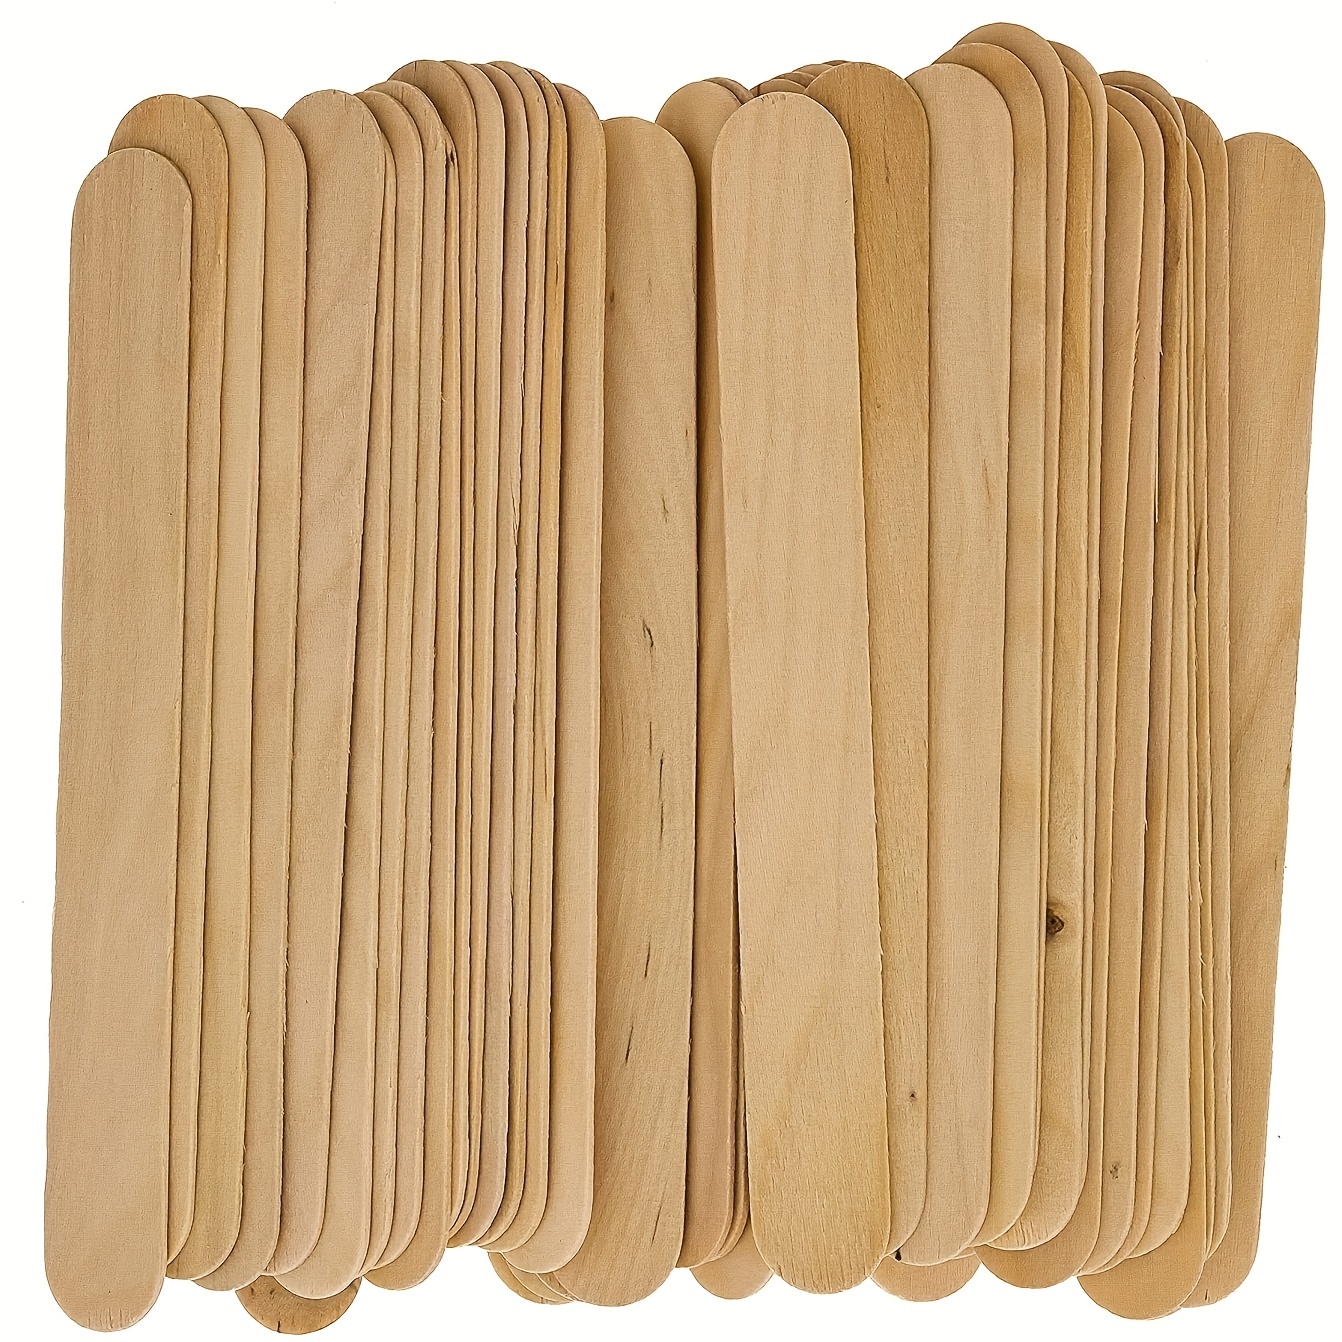 

100 Pc Natural Wood Wax Applicator Sticks Almost 15 Inch, Wood Waxing Craft Sticks Spatulas Applicators For Hair Removal Eyebrow And Body